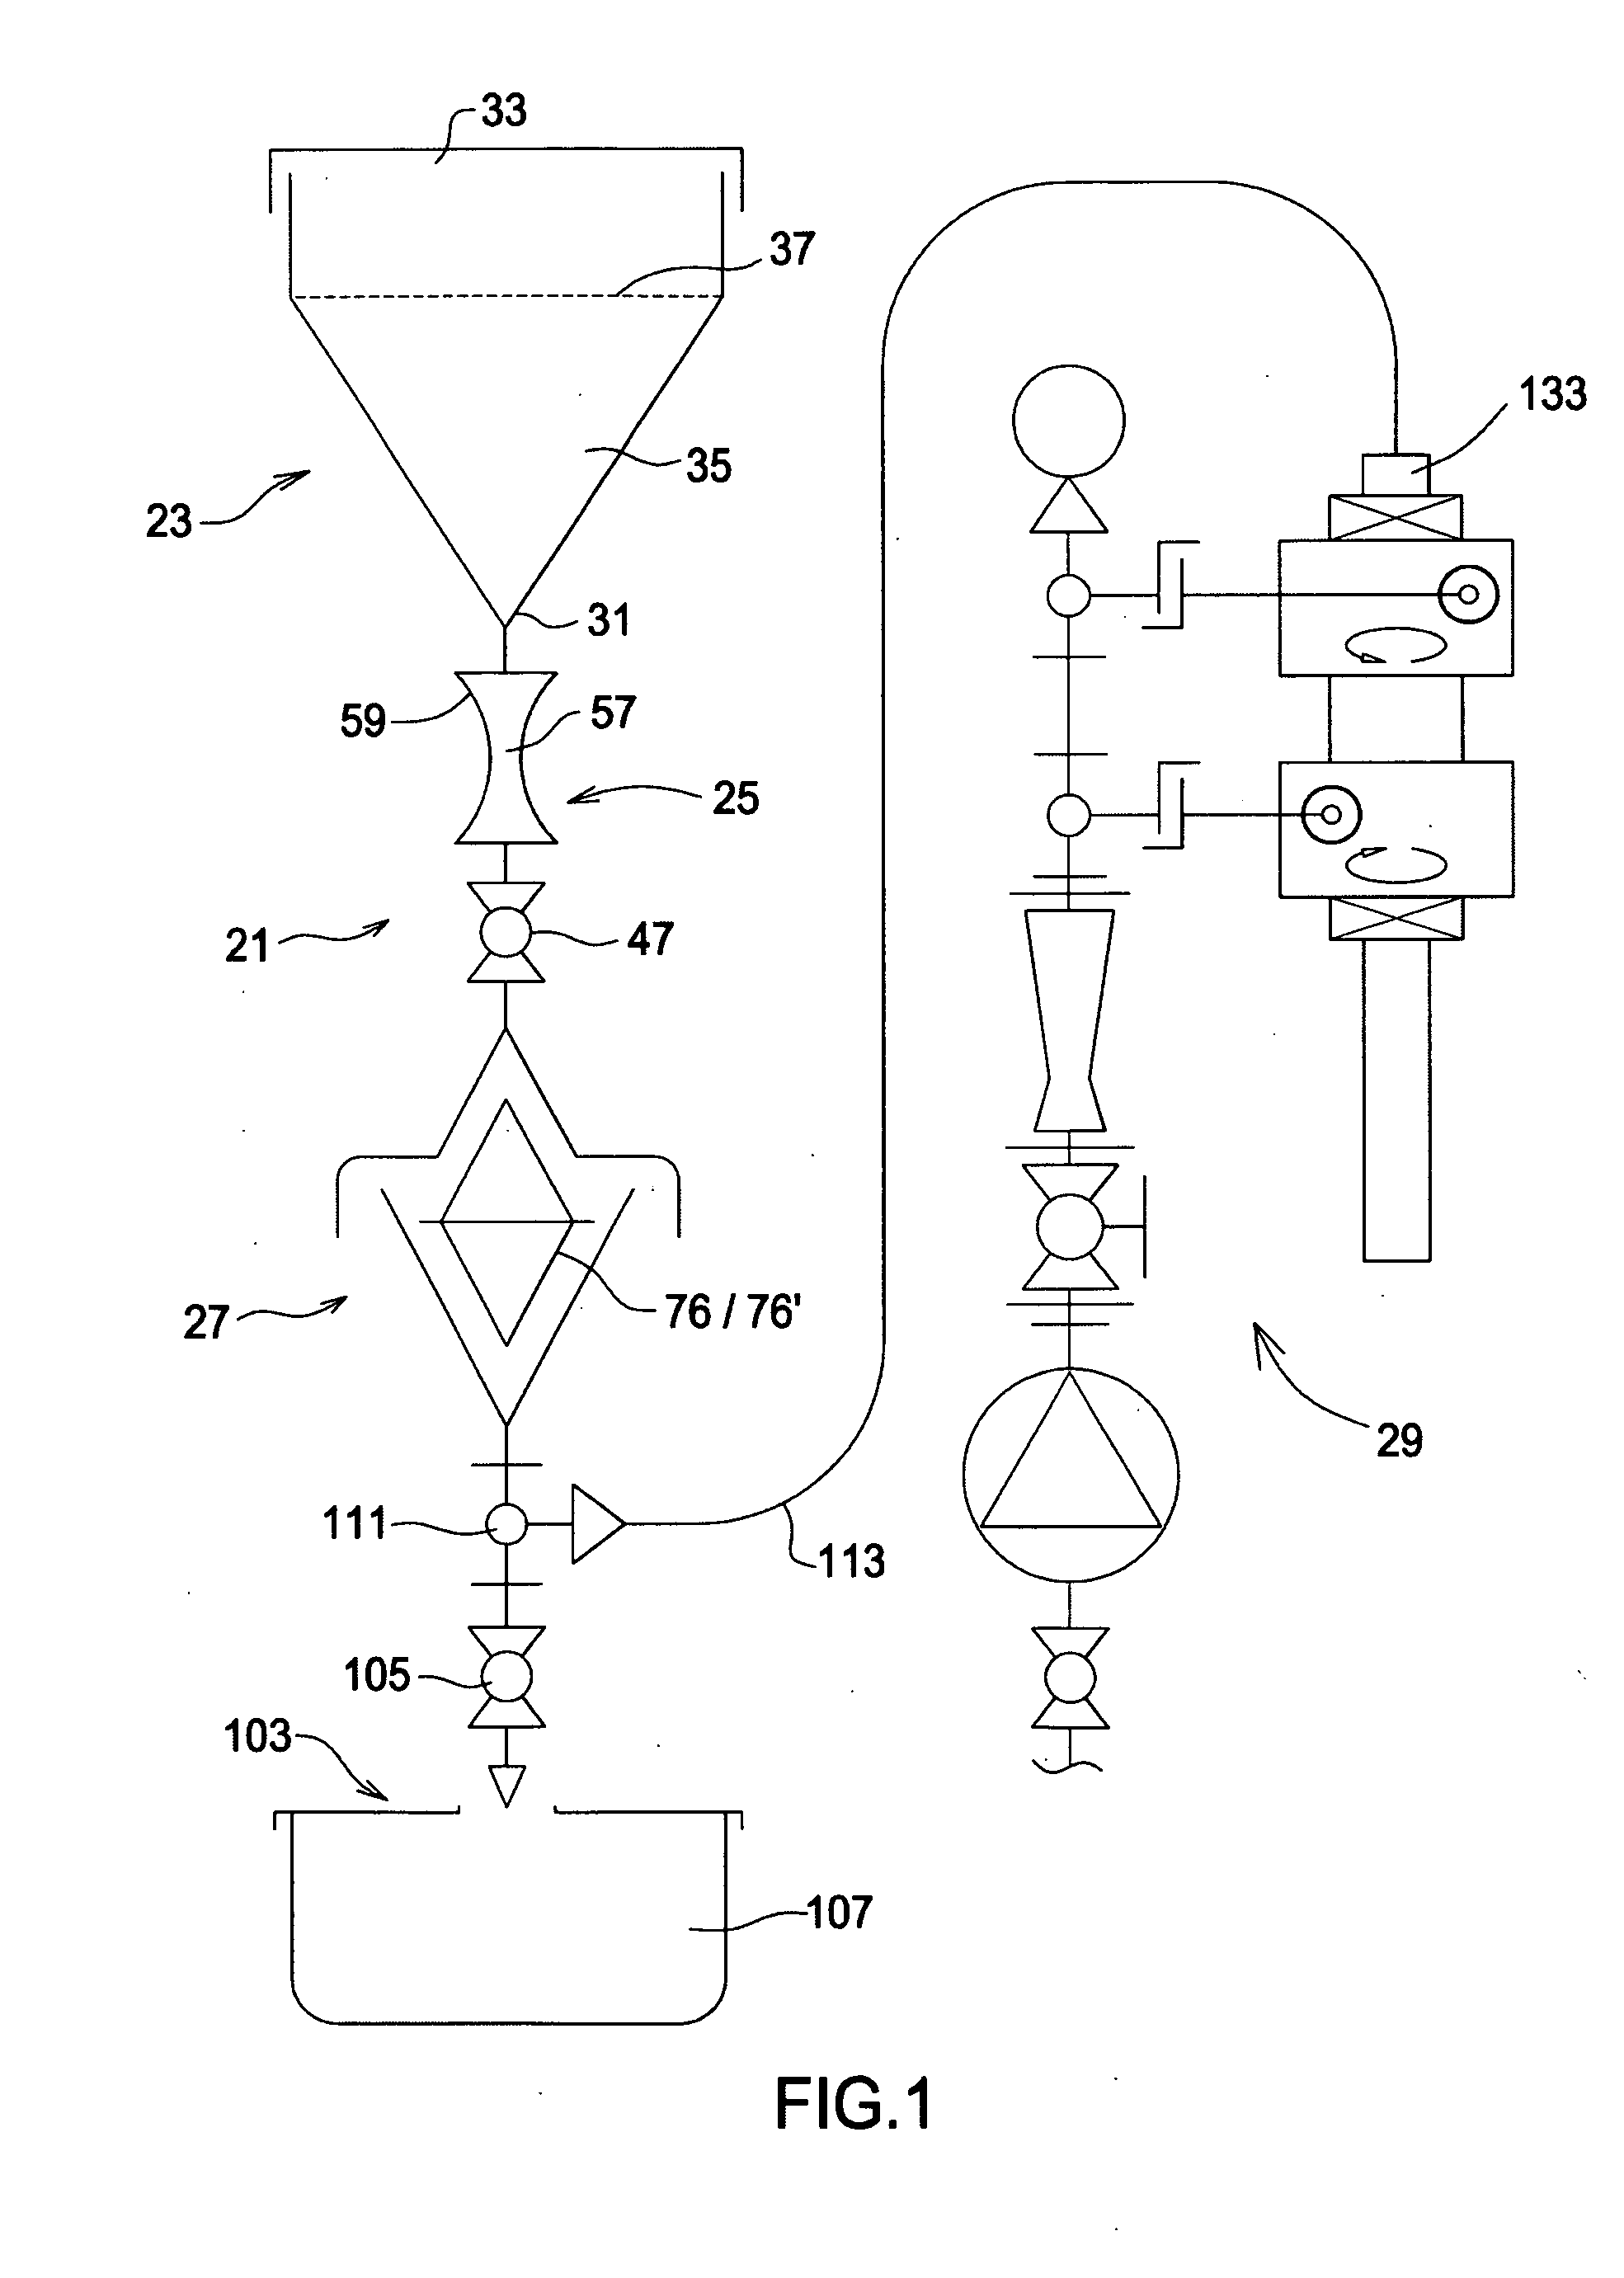 Apparatus and methods for entraining a substance in a fluid stream